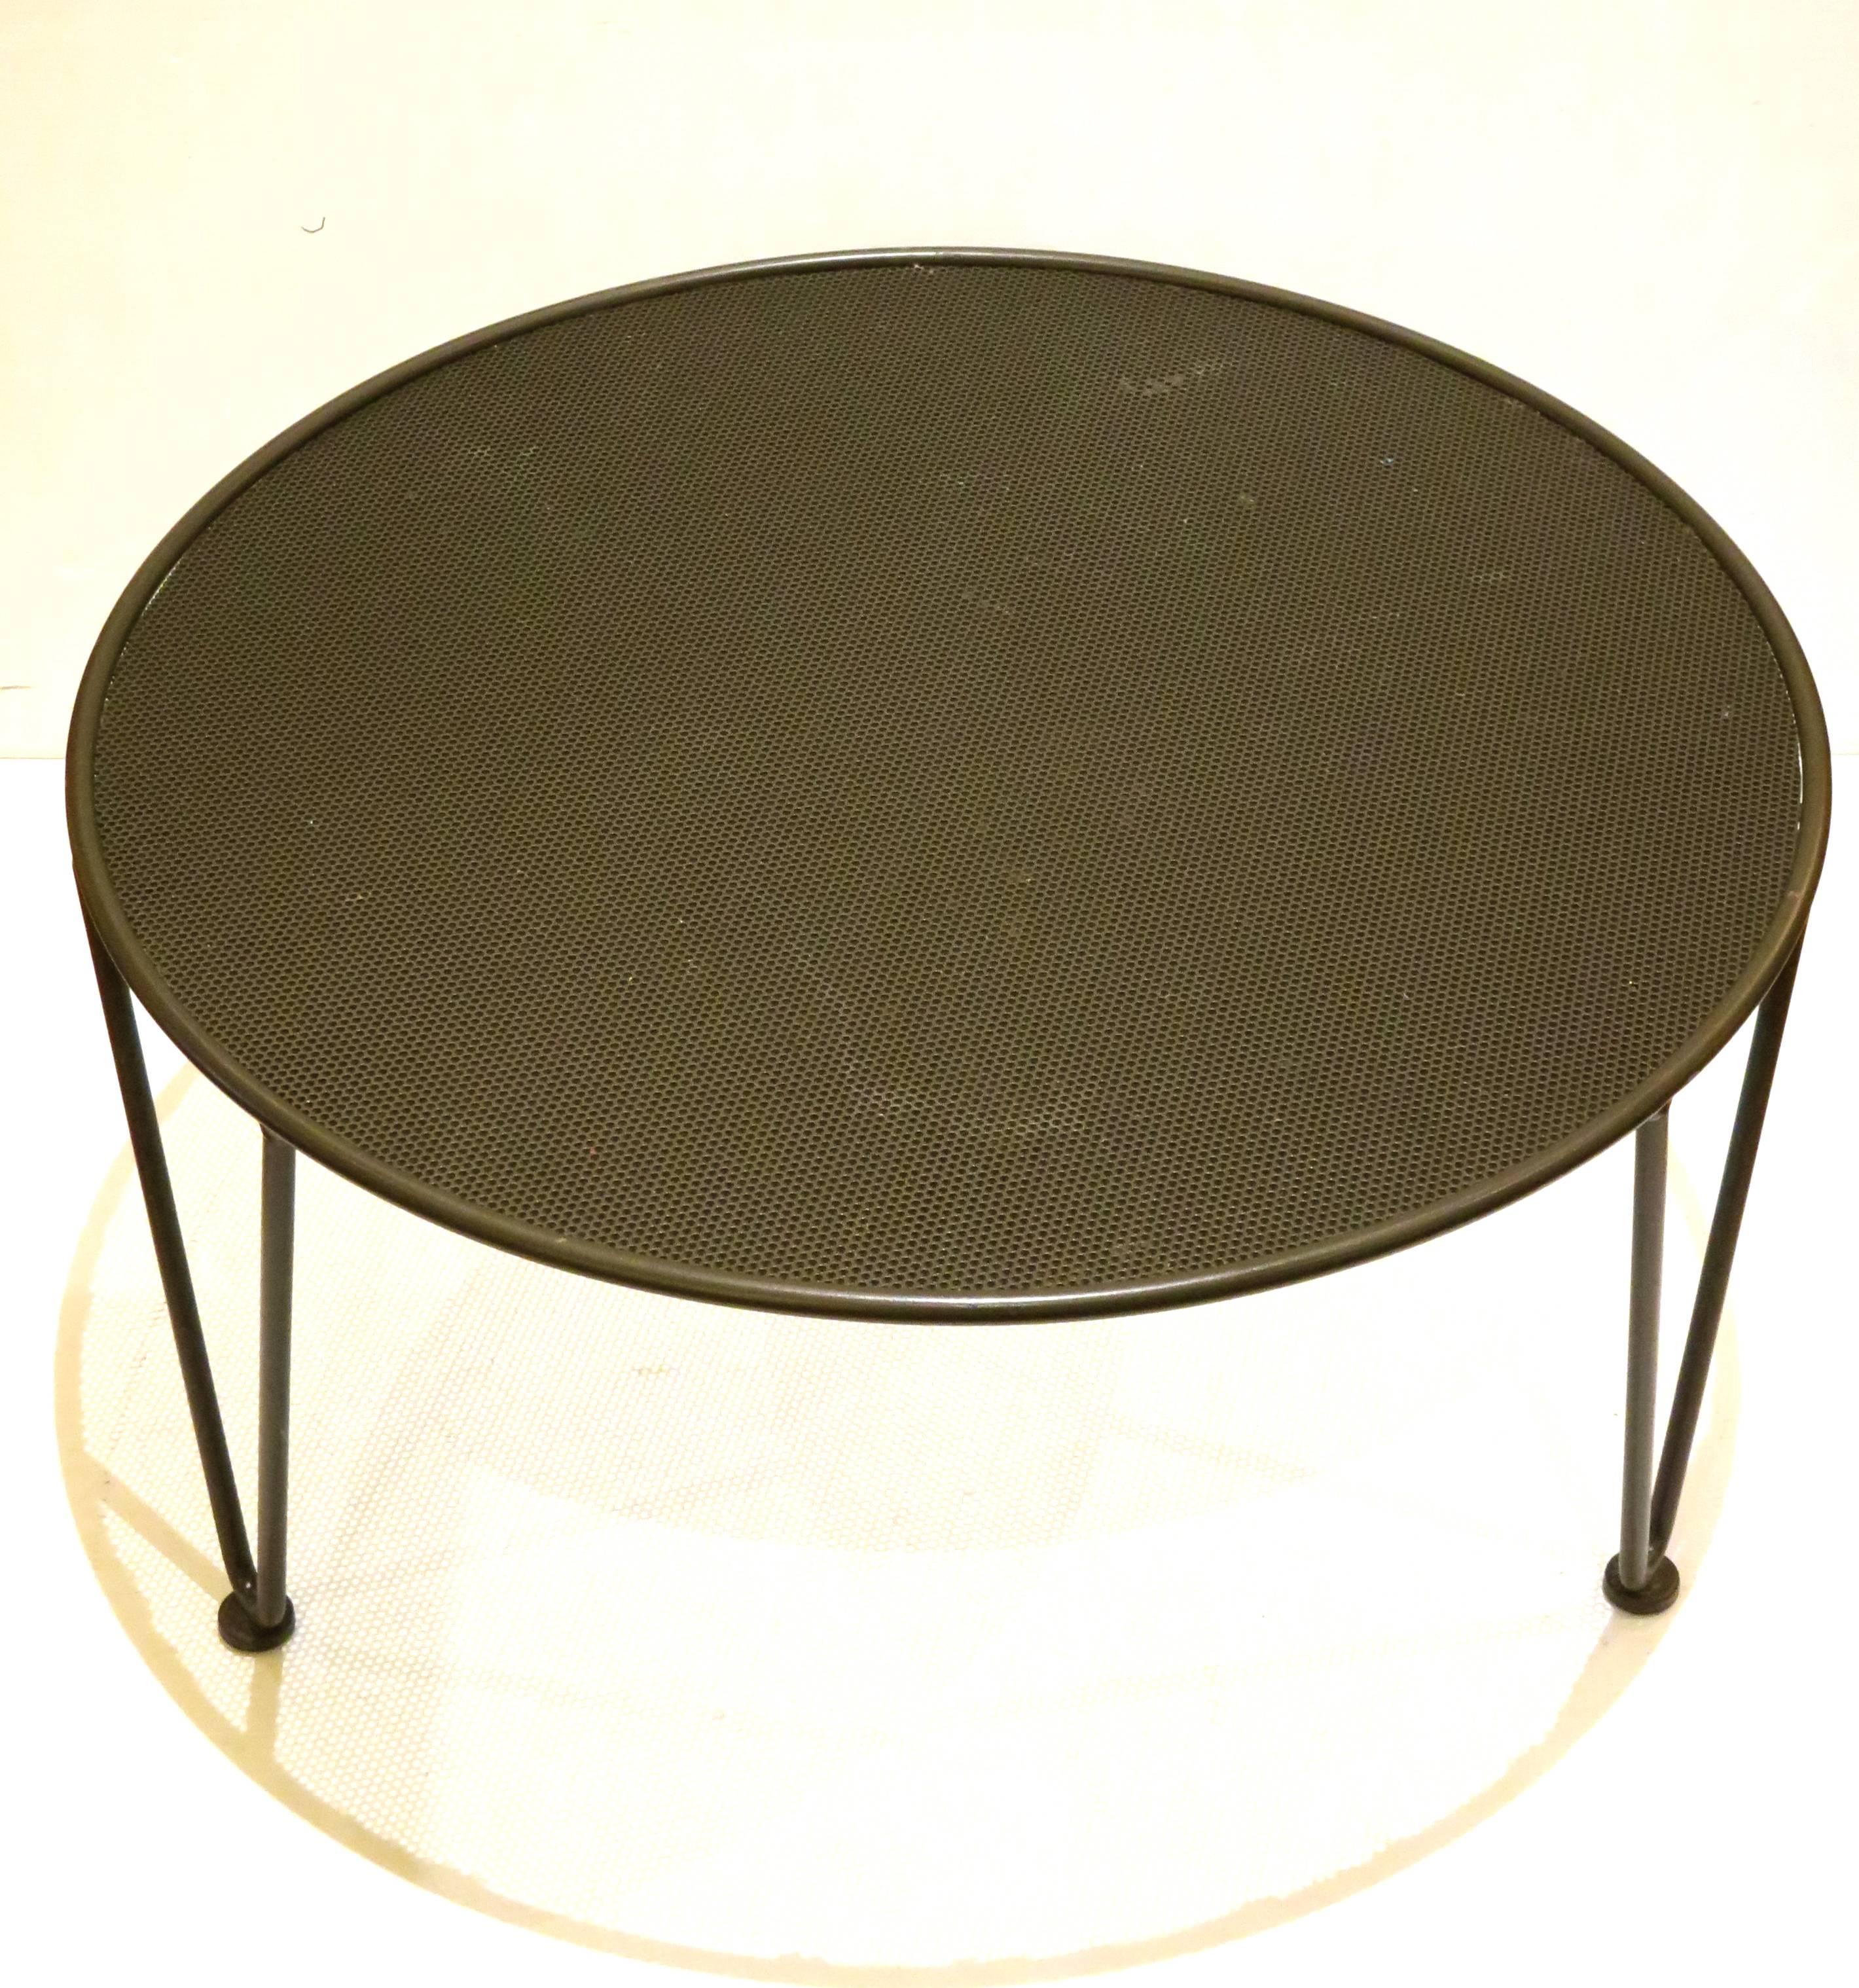 Retro modern iron round coffee cocktail patio table with hairpin legs and perforated top the table has been sandblasted and powder coated in a charcoal finish, the three hairpin legs have plastic bottom to protect the floor.